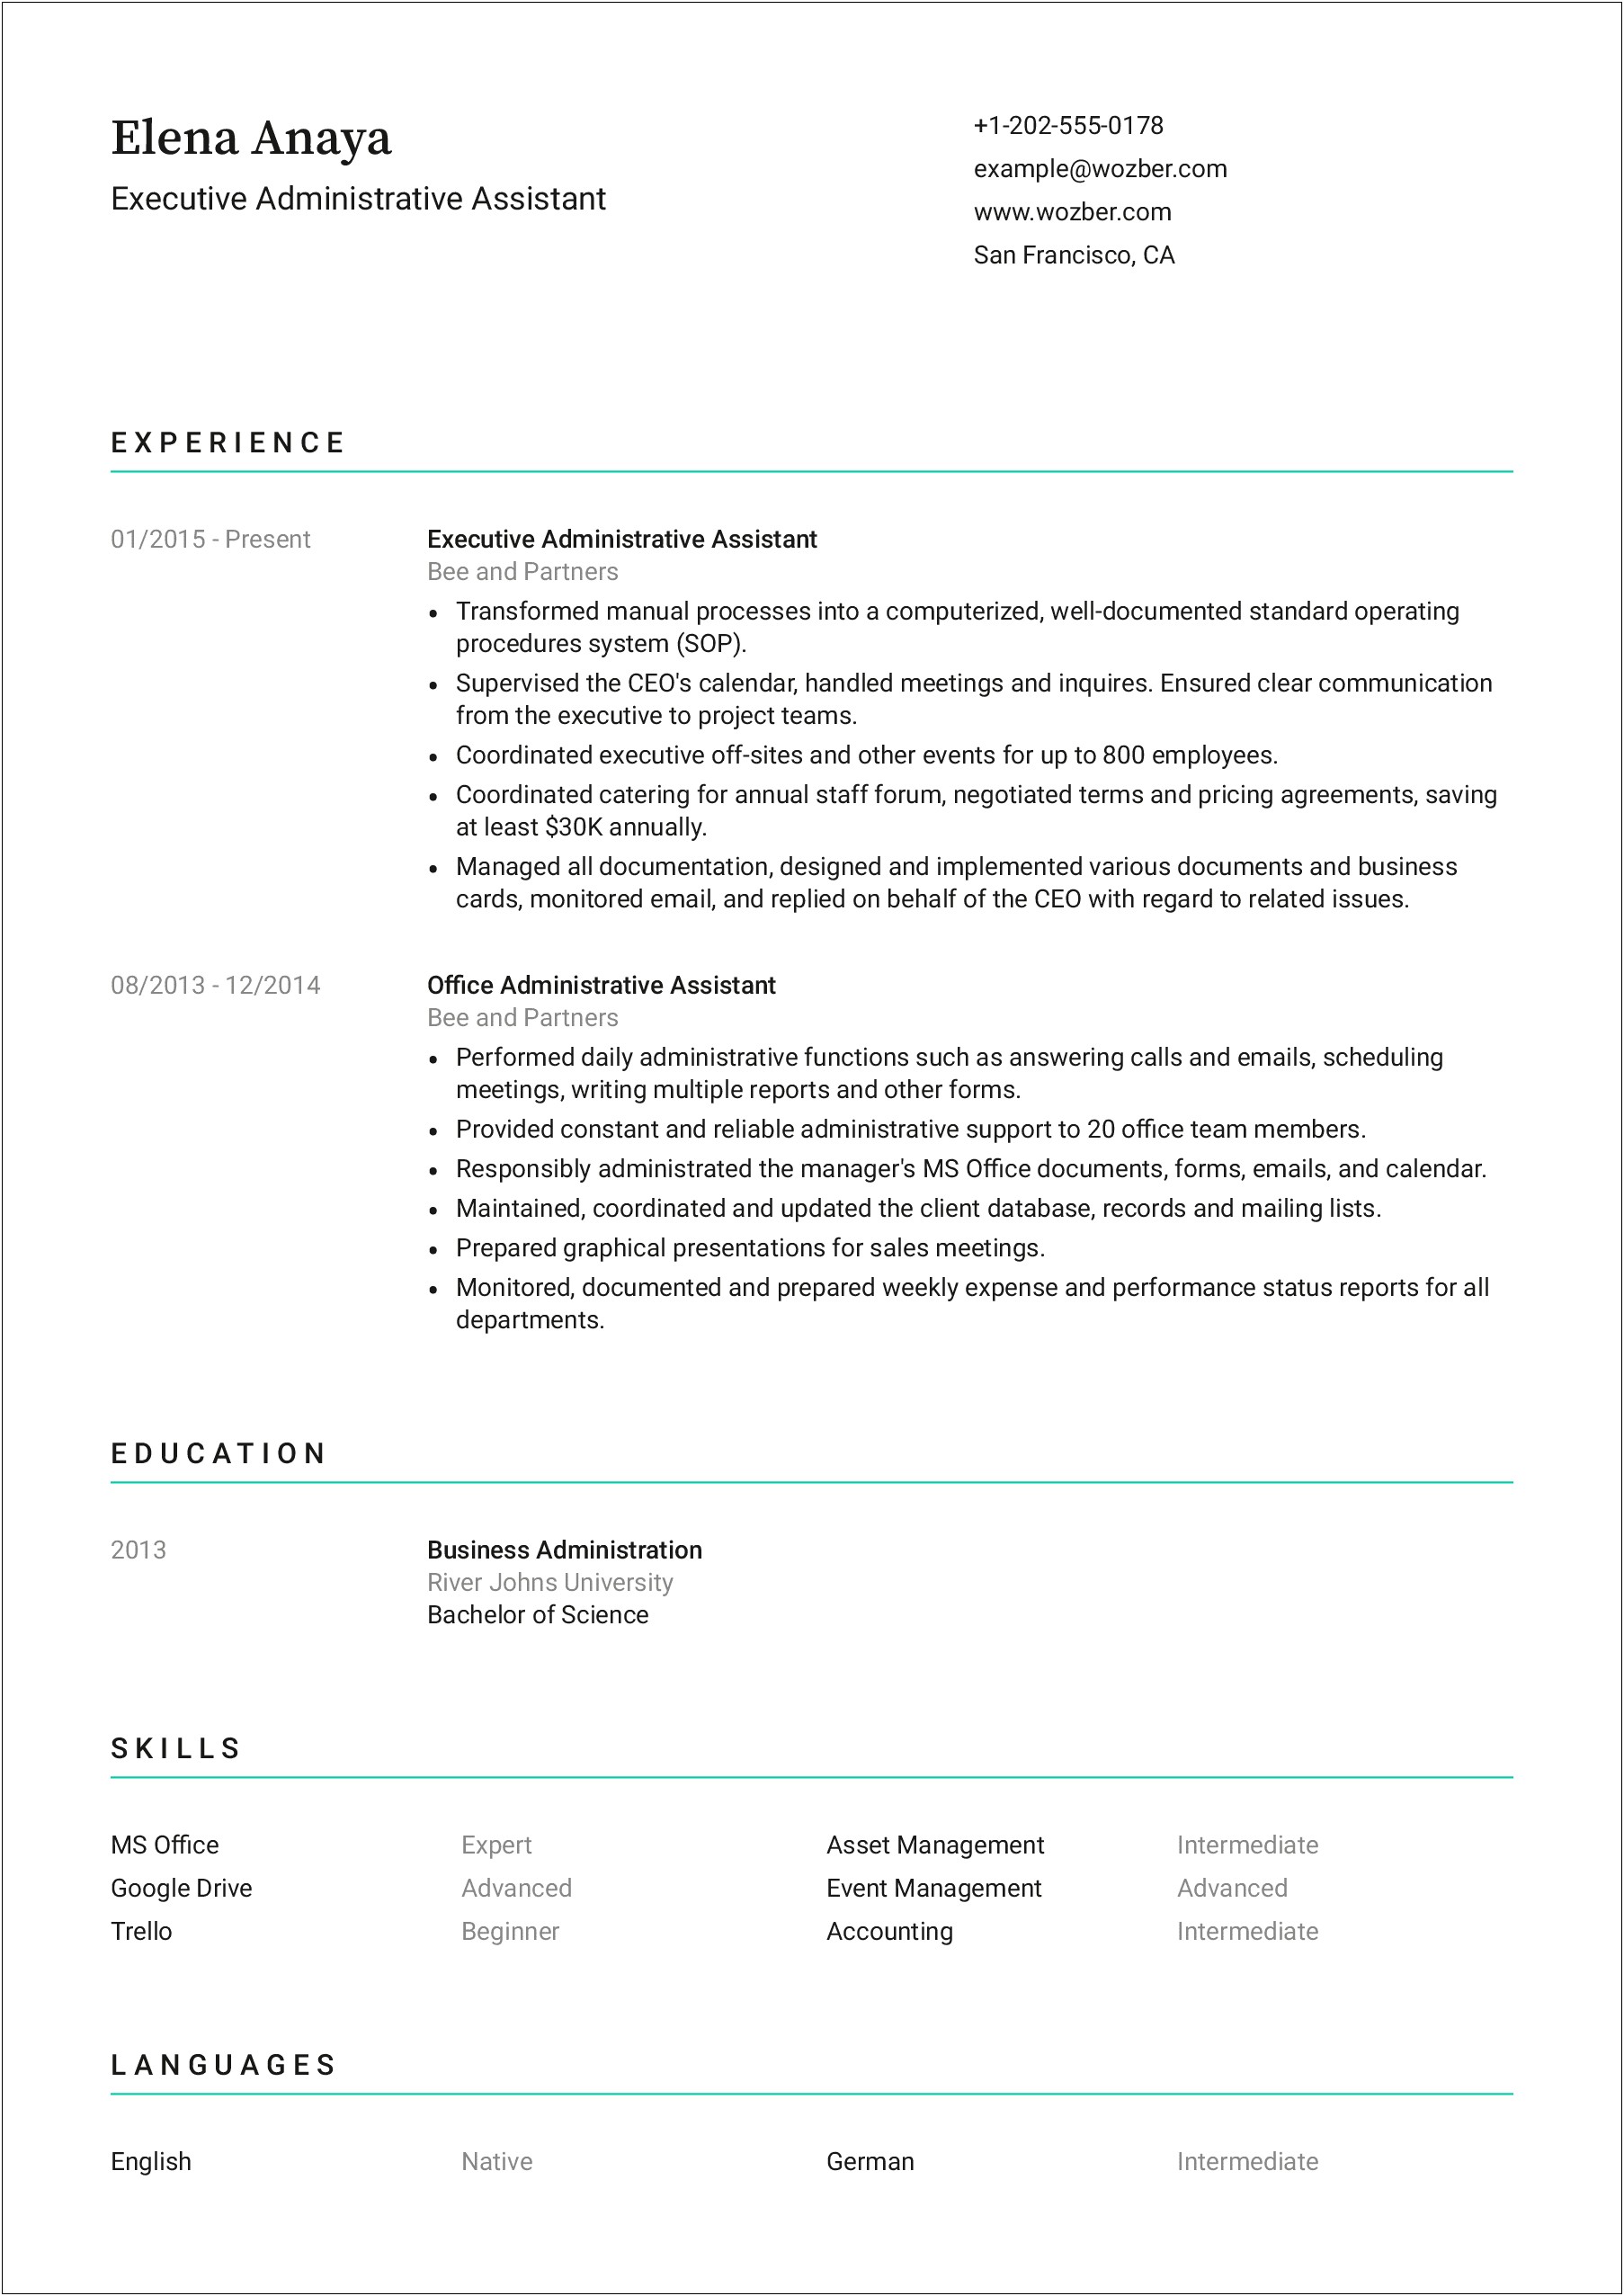 Resume Sample Format For Administrative Assistant